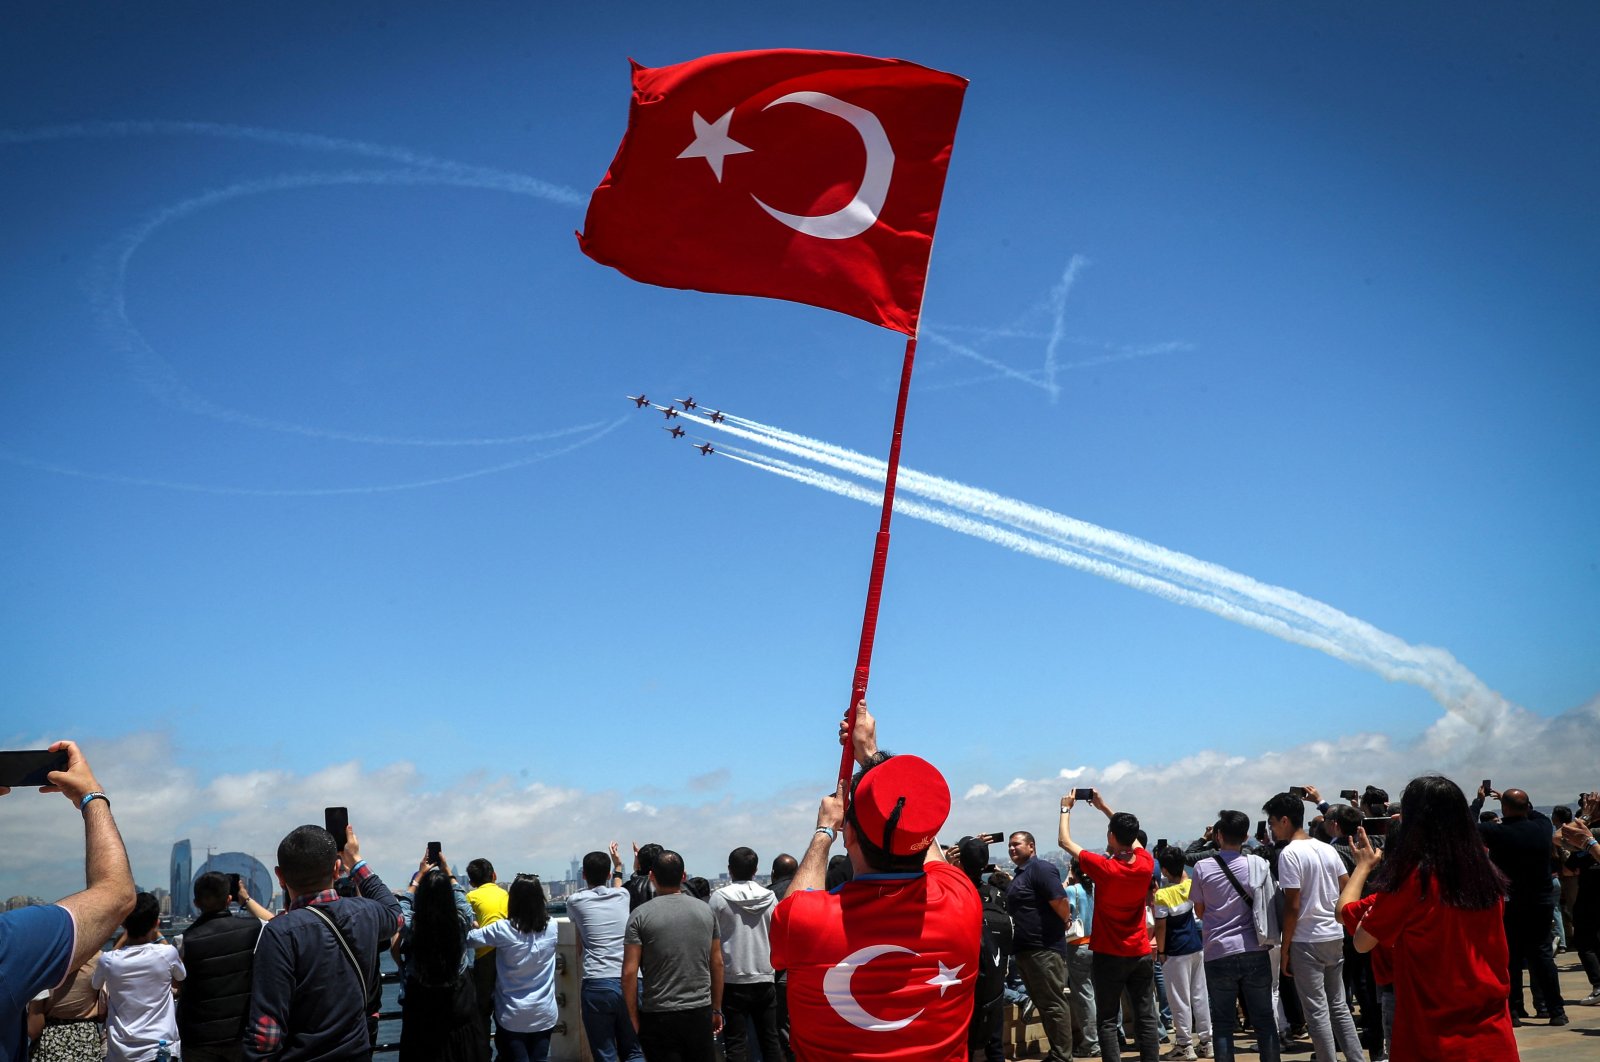 Turkish Air Forces Command fighter jets, the "Turkish Stars," perform creating the national flag&#039;s star and crescent during the opening ceremony of the aerospace and technology festival "Teknofest Azerbaijan" at Baku Crystal Hall, Baku, Azerbaijan, May 27, 2022. (AFP Photo)